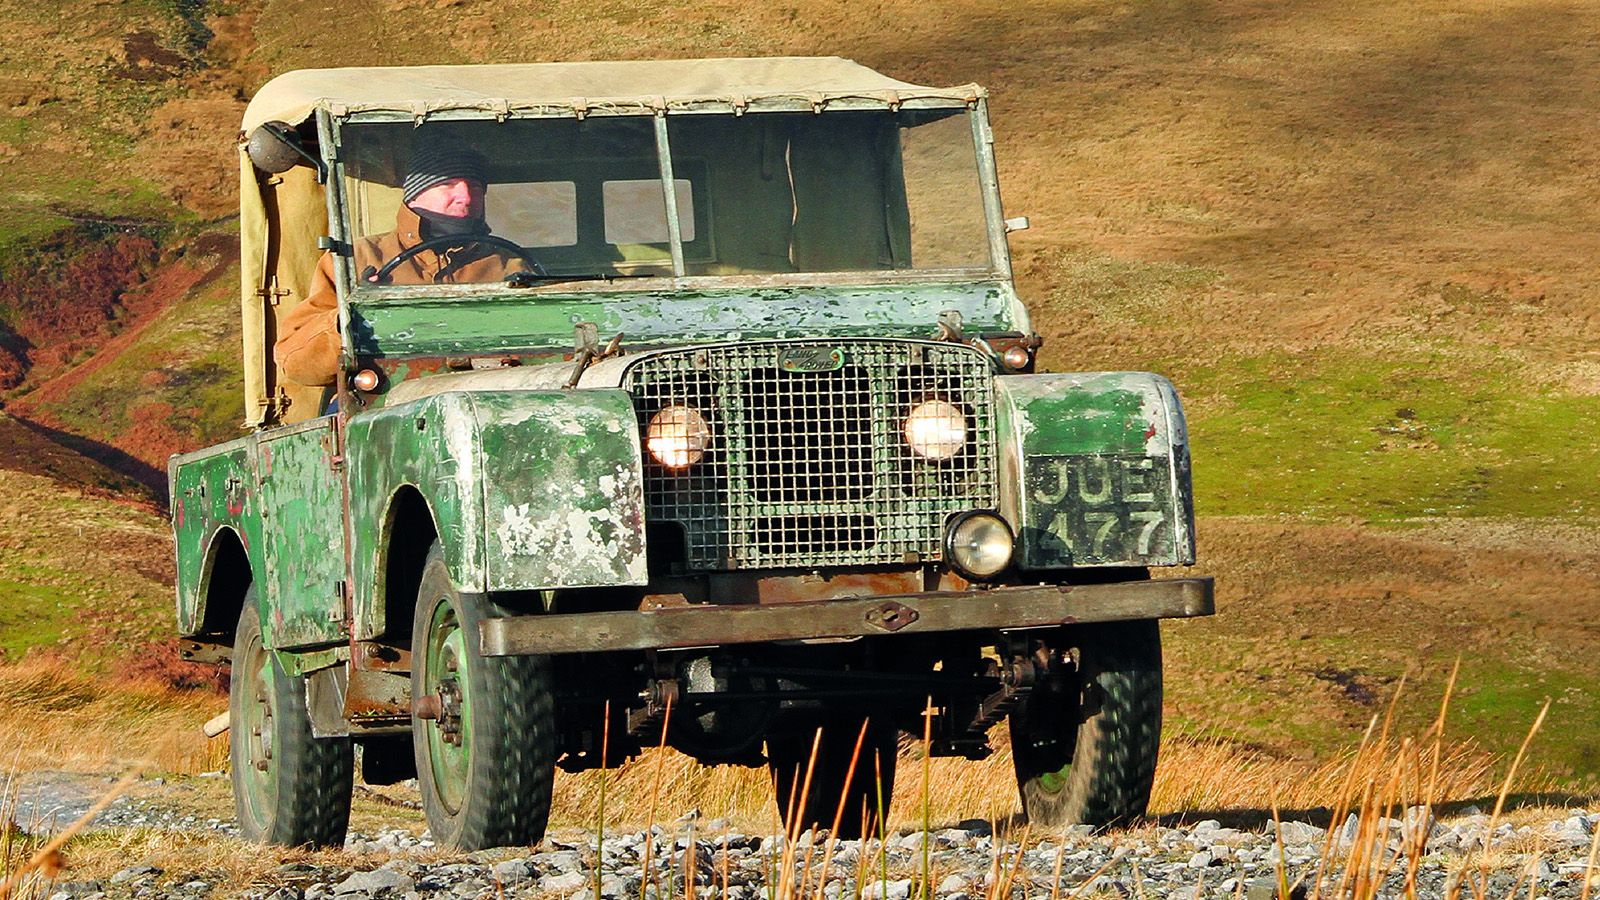 The Very First Production Land Rover Spent Decades Hiding on a Farm